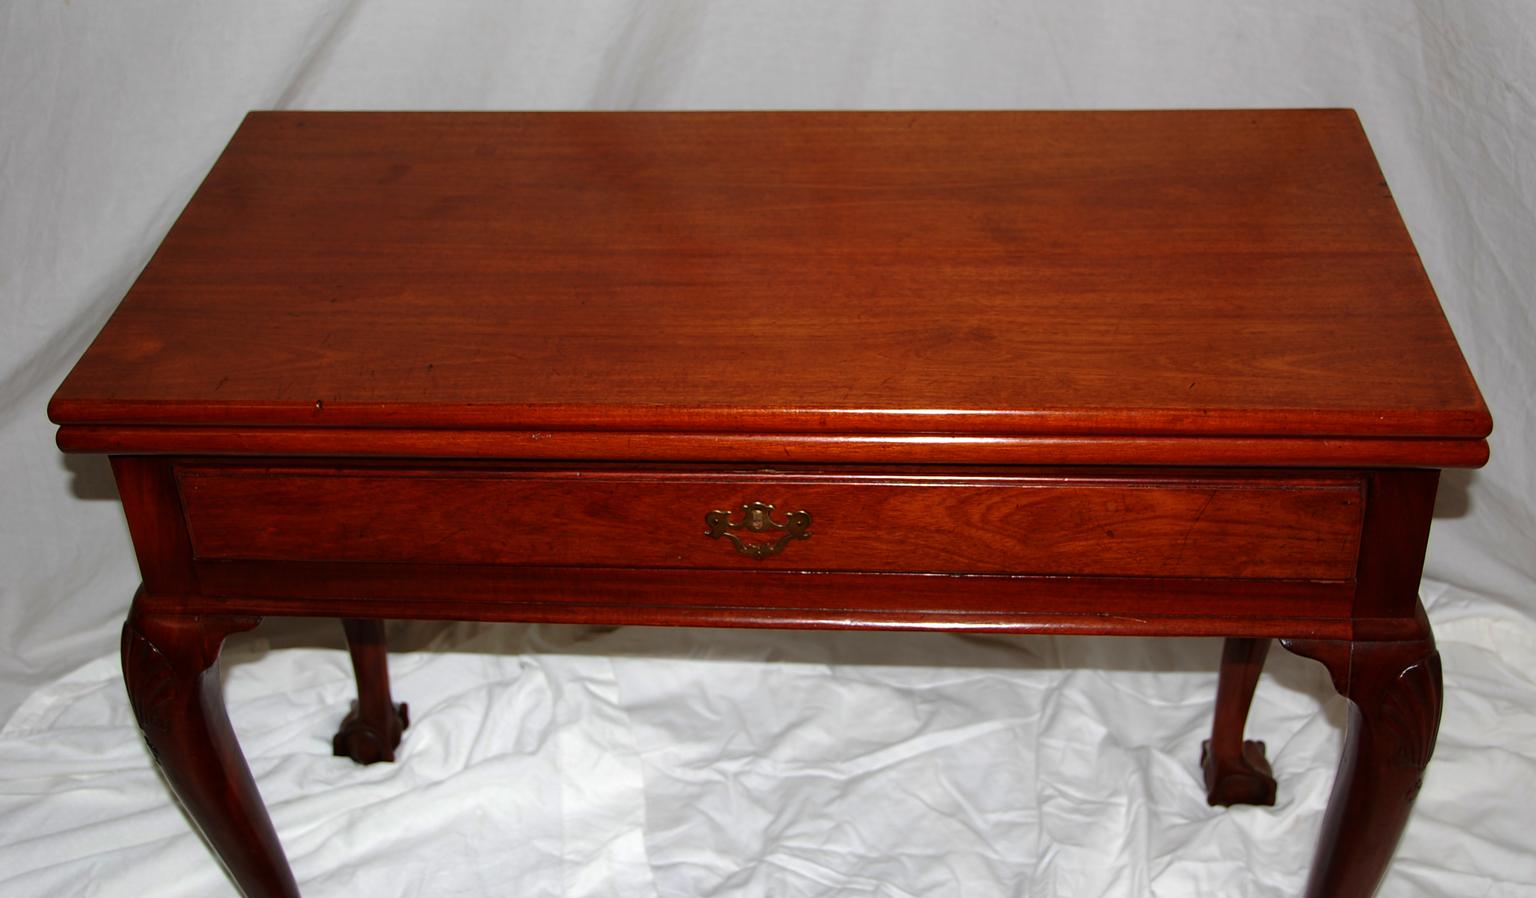 Irish George II period Chippendale mahogany fold over tea table with shell carved knees, cabriole legs and carved ball and claw feet. This tea table also has a drawer, which is unusual in this form. The top has had a repair and the gate has been